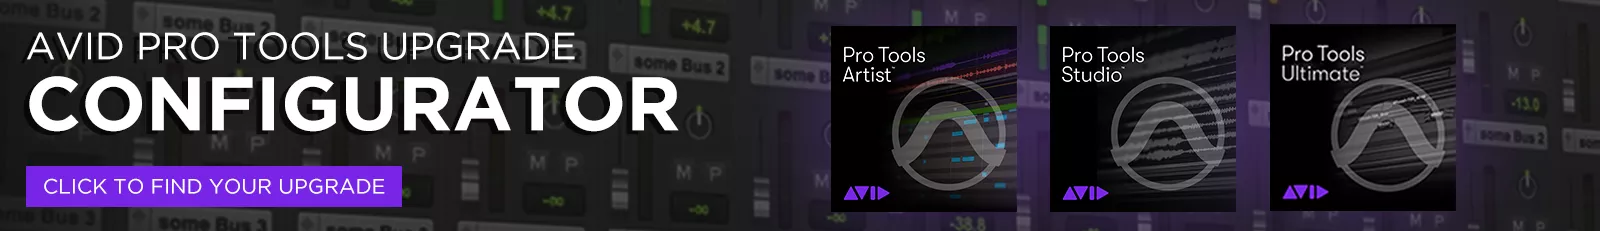 Pro Tools Upgrade Configurator - Find the Pro Tools Upgrade you need